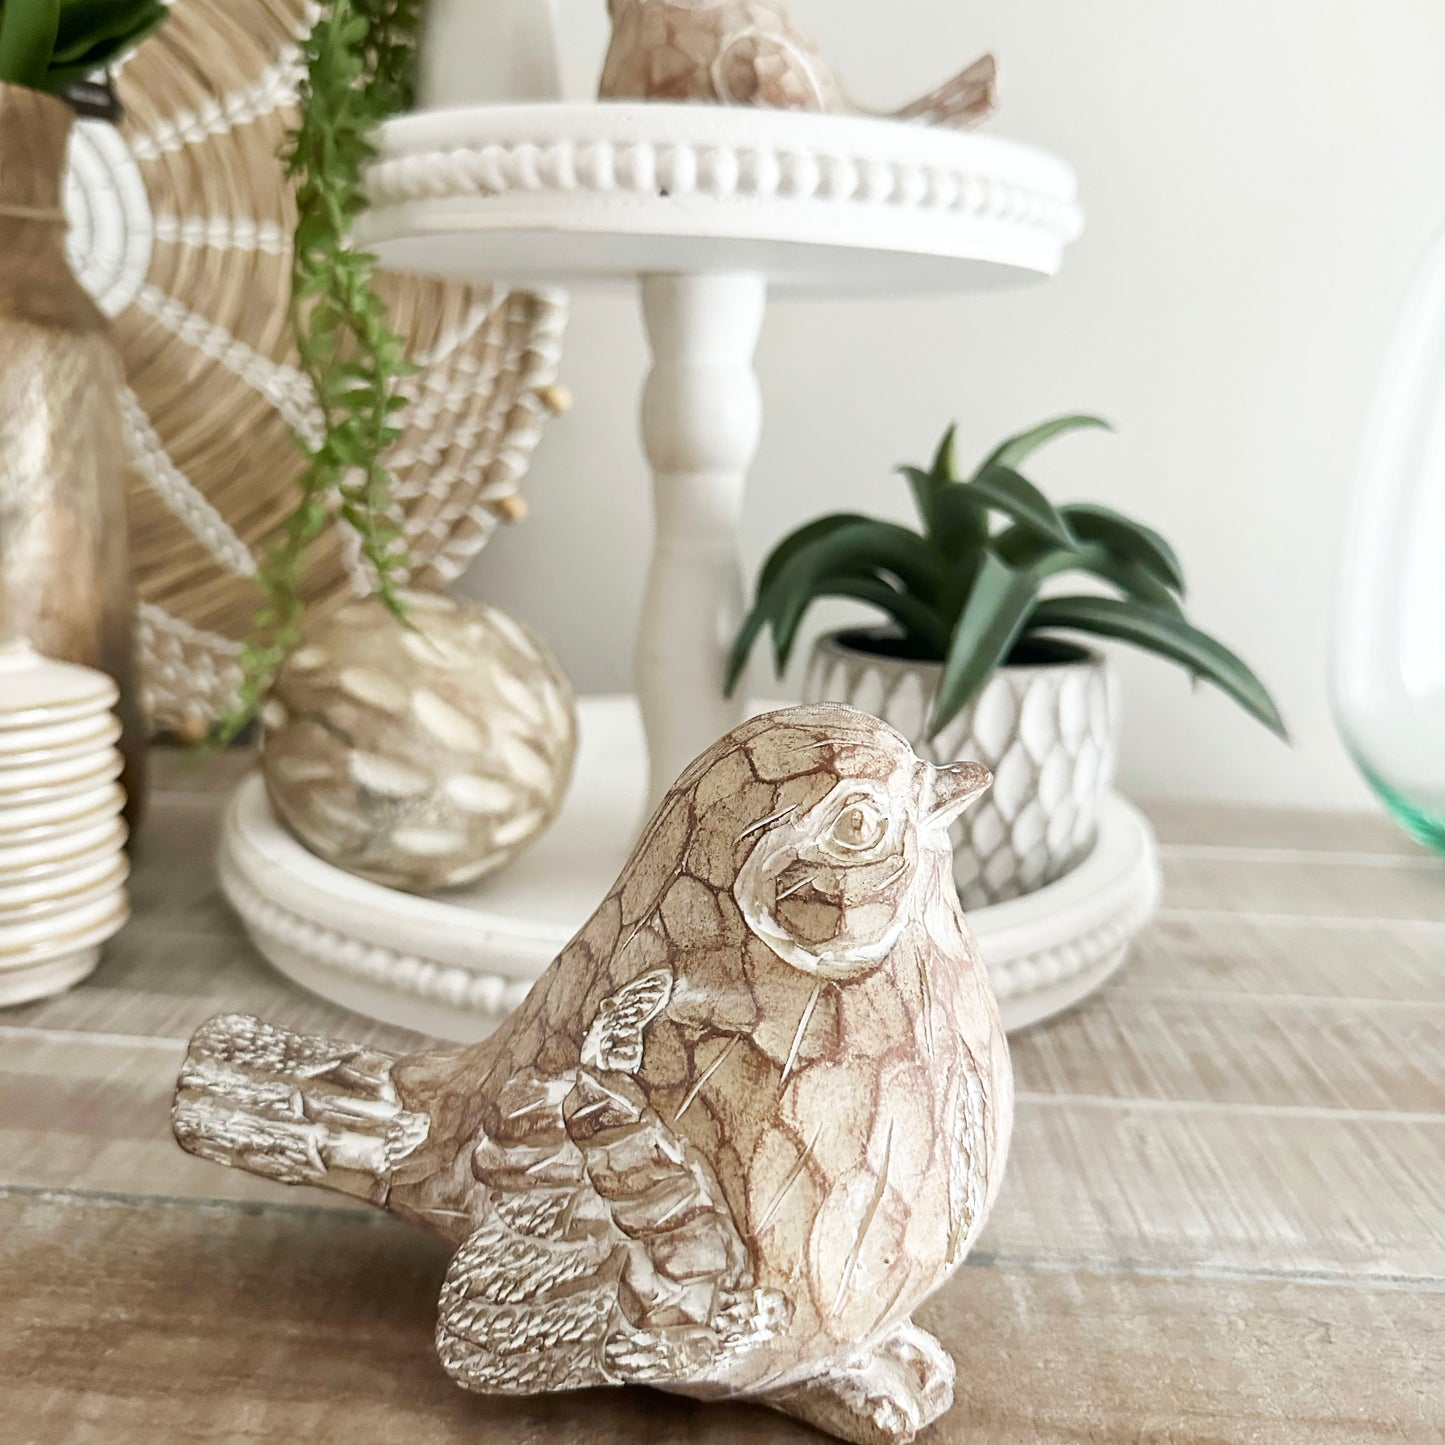 Wooden Distressed Birdy